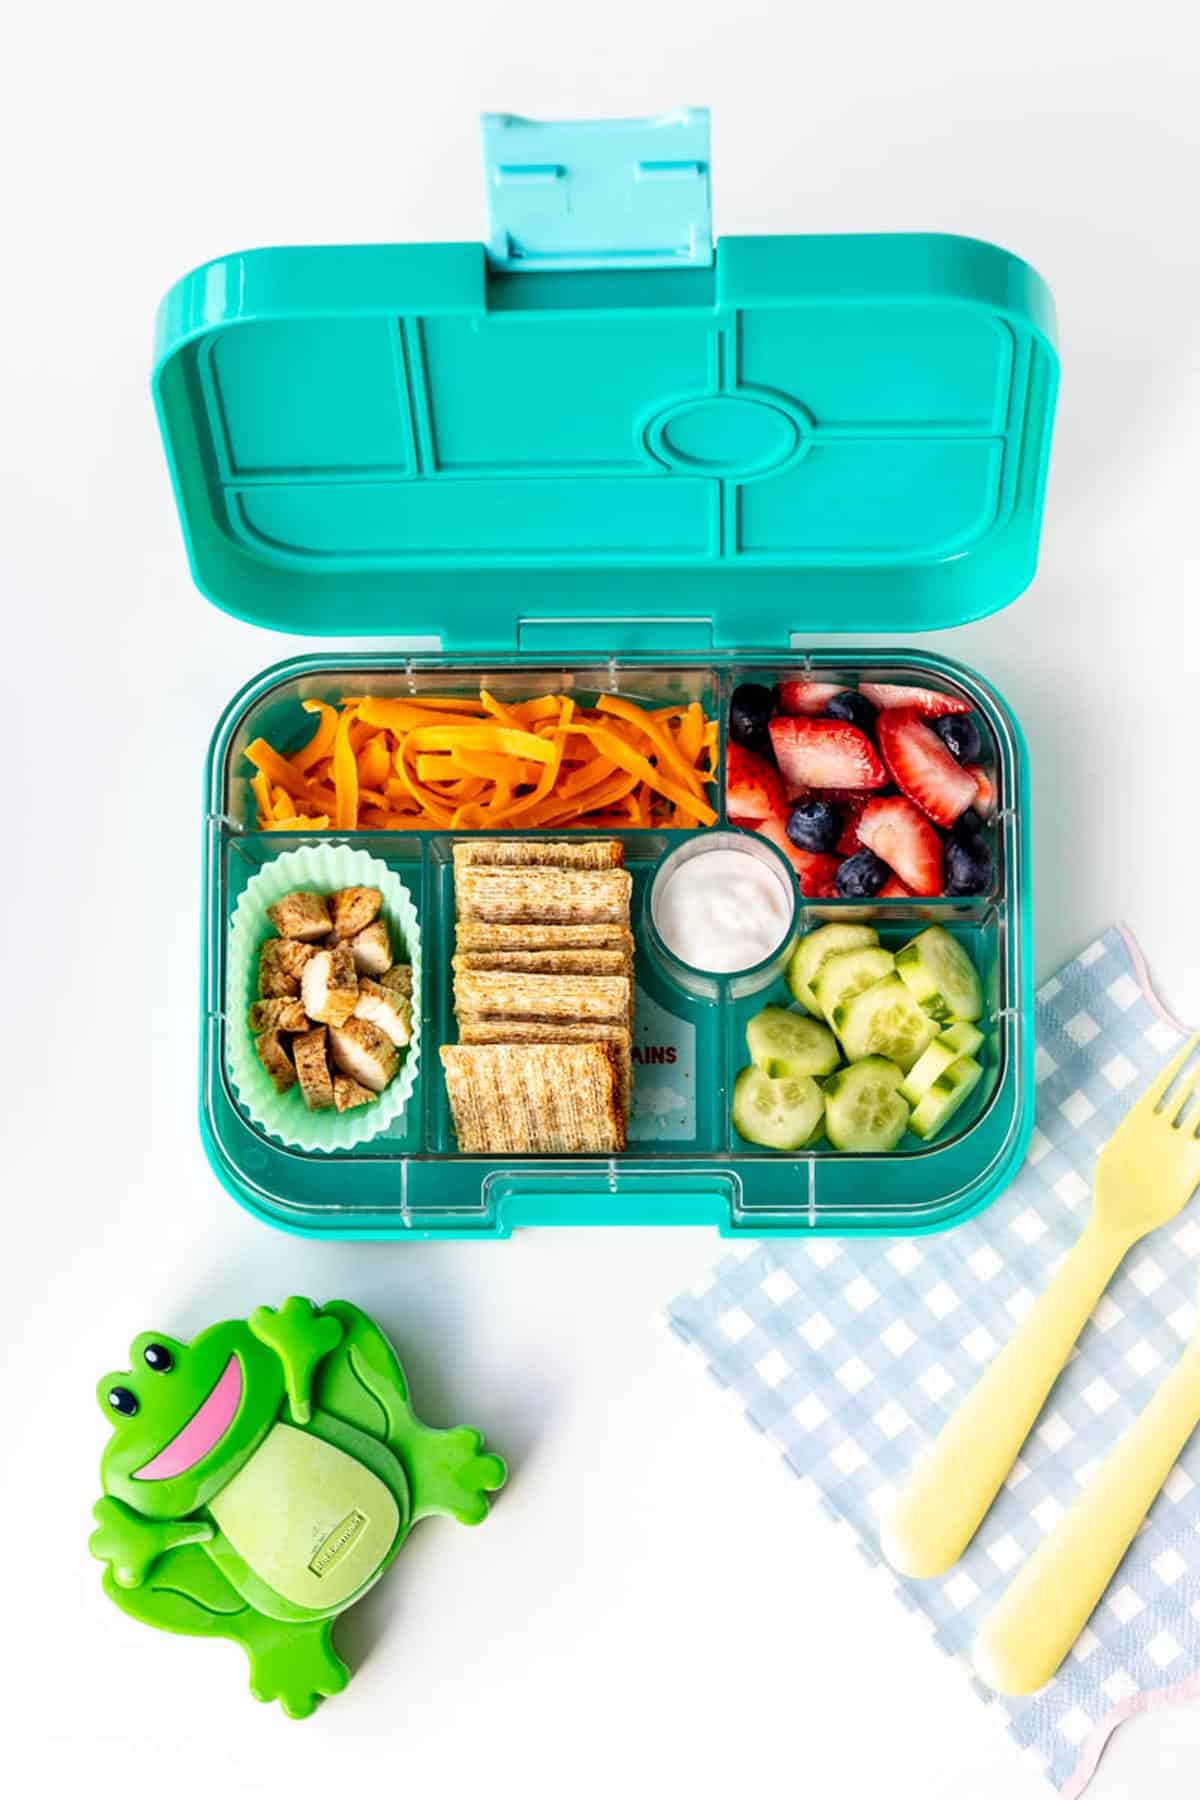 A frog ice pack next to a packed lunch box.